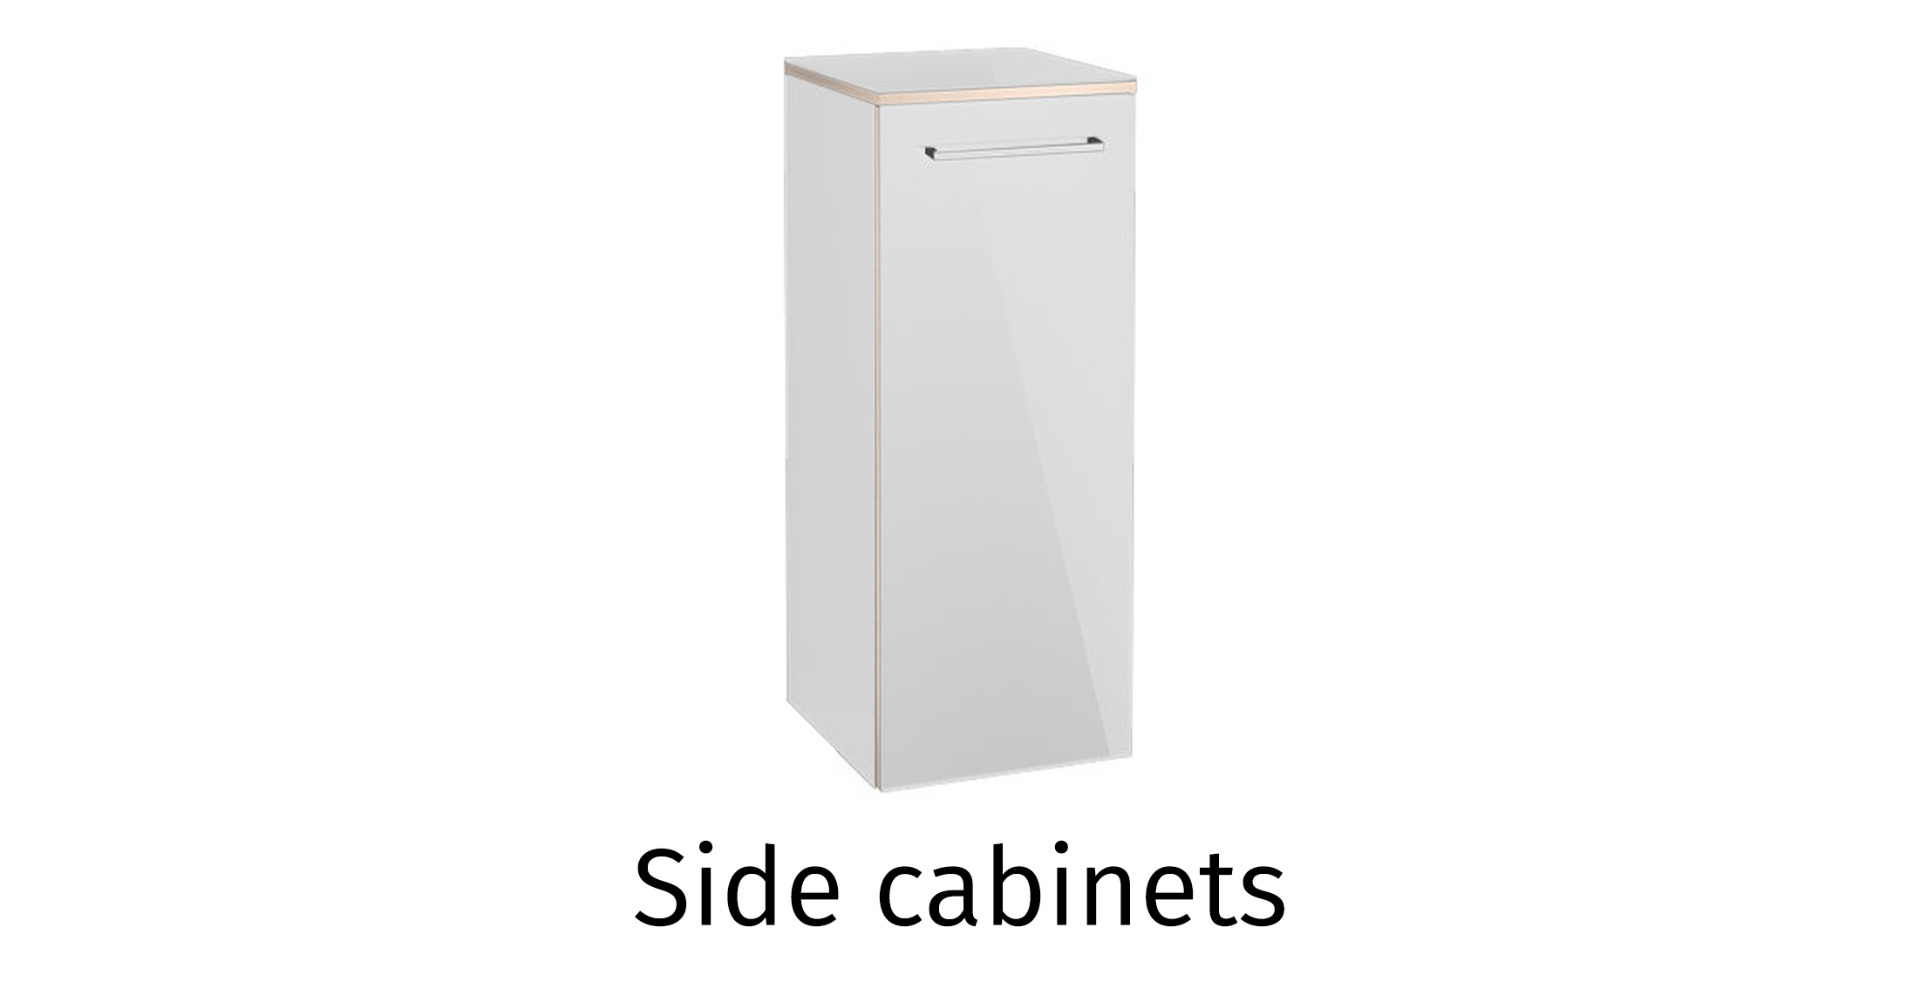 Side cabinets